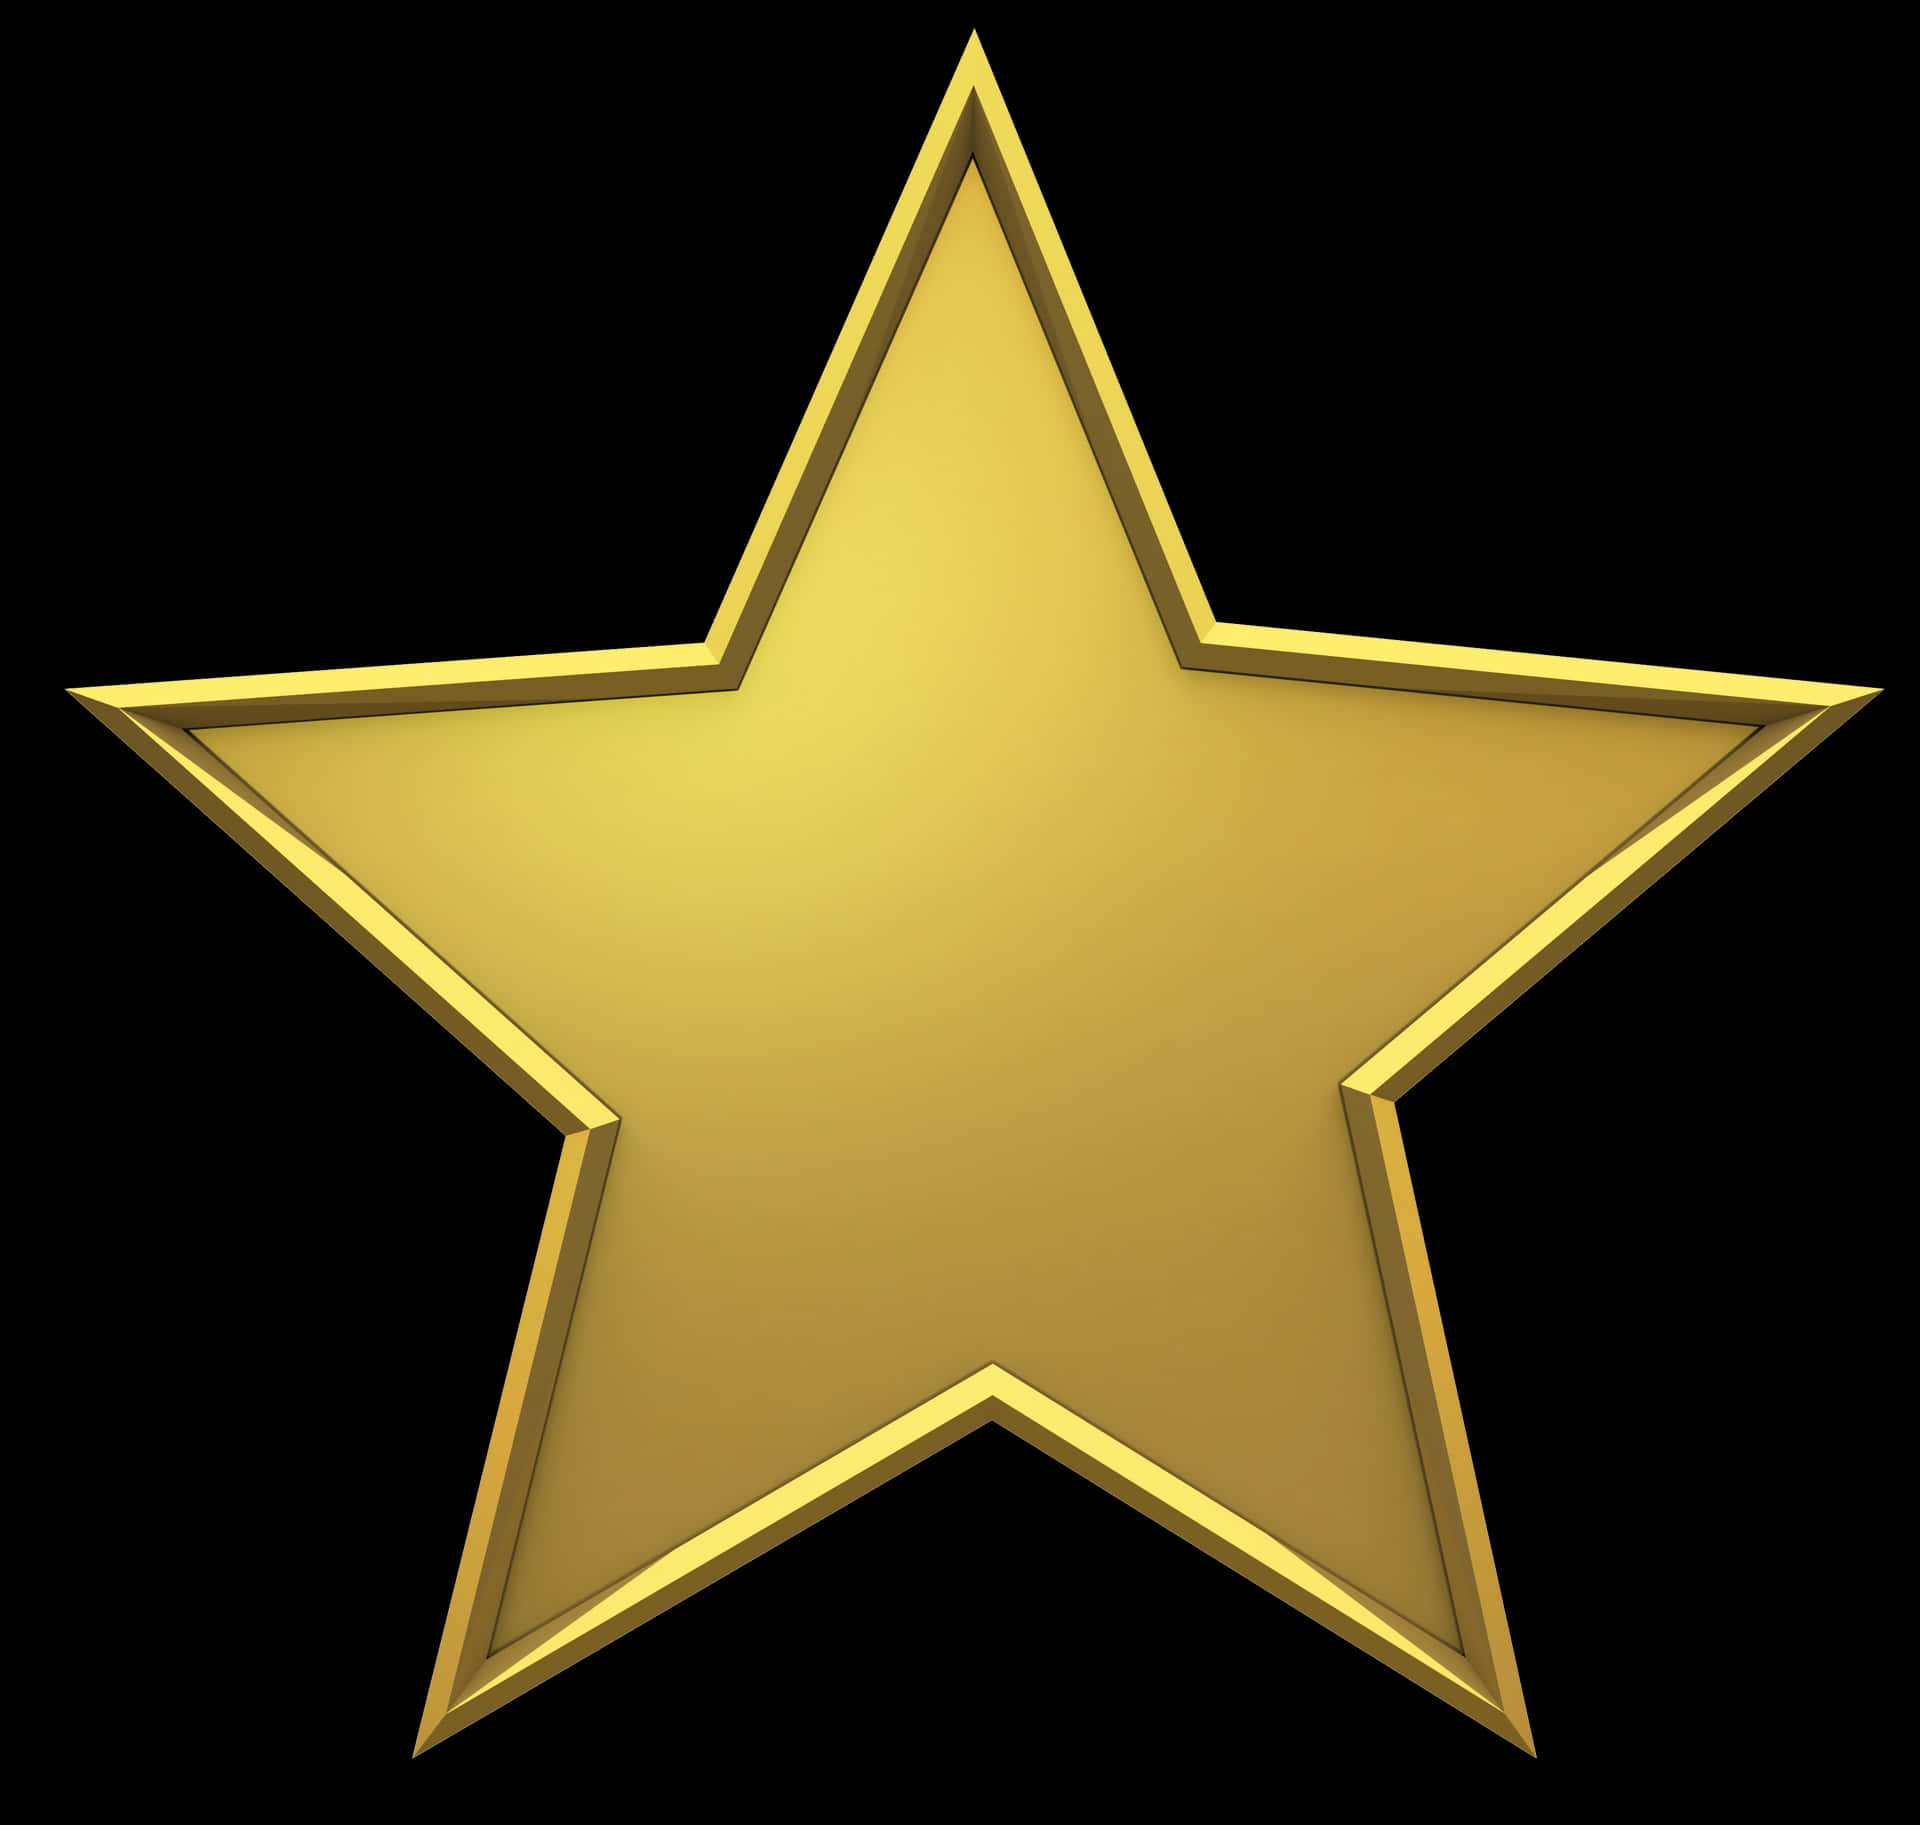 Golden Star Icon PNG image